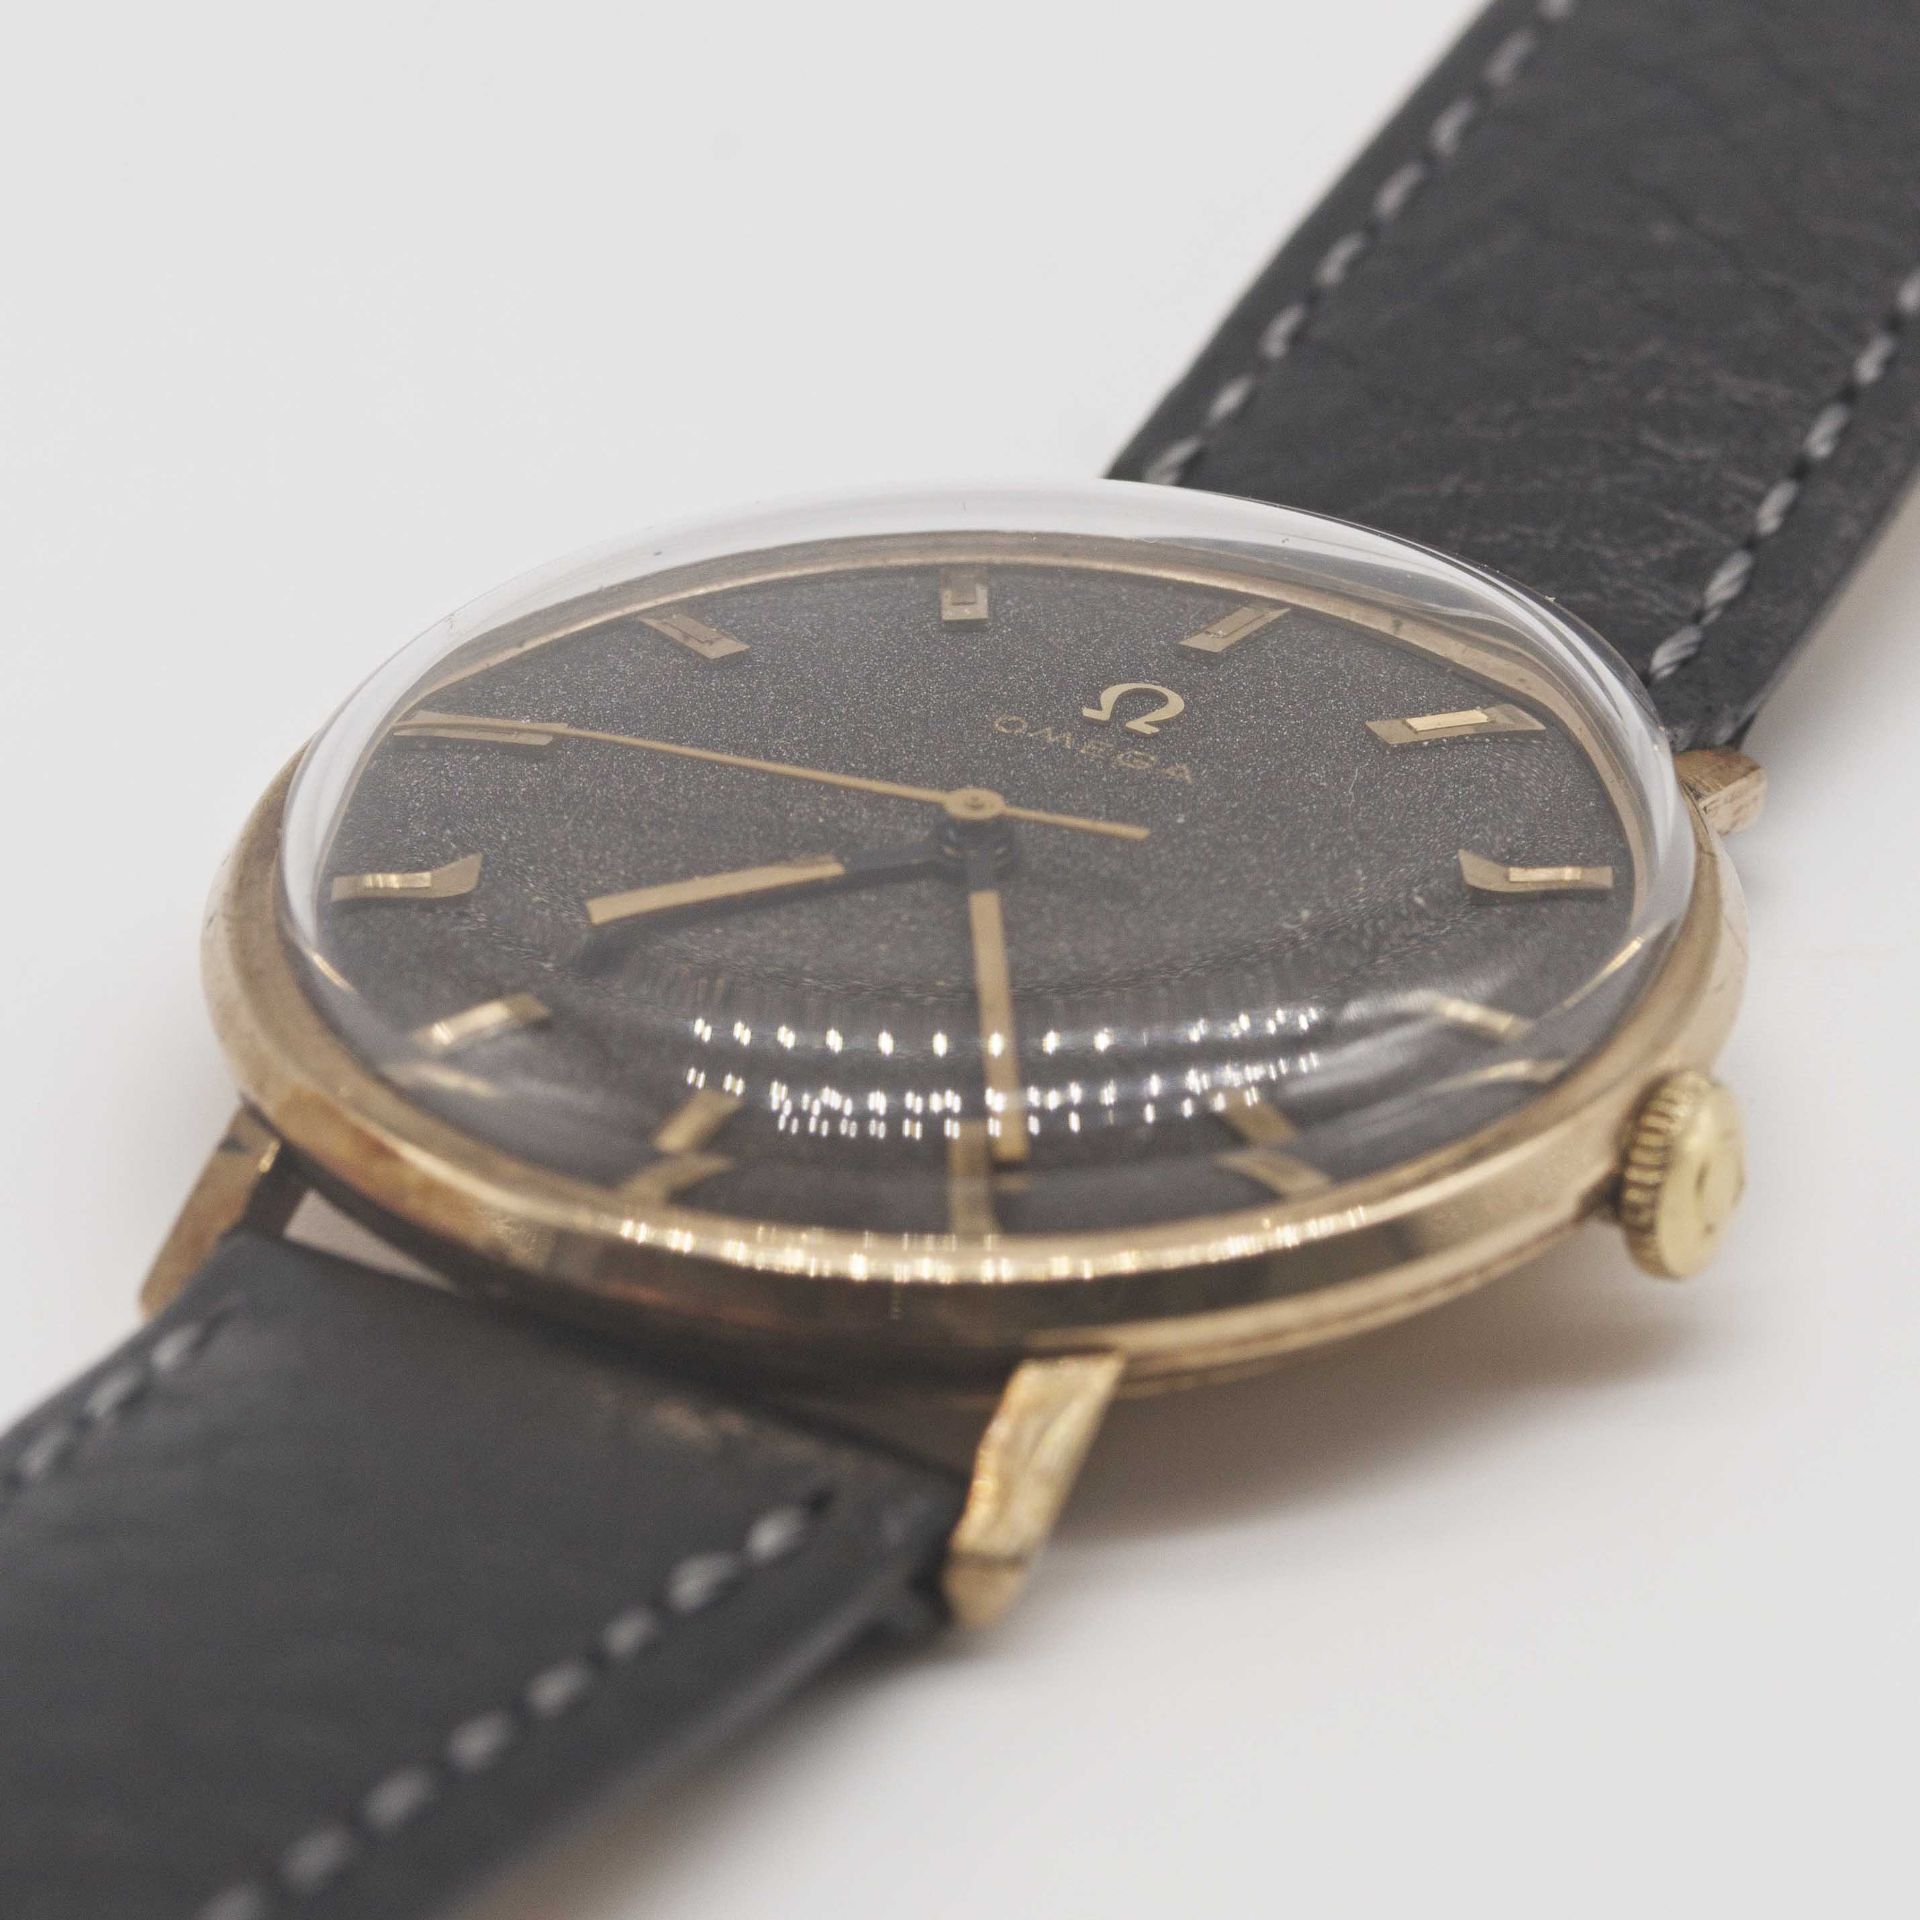 A GENTLEMAN'S 9CT SOLID GOLD OMEGA WRIST WATCH CIRCA 1960s, WITH GREY DIAL Movement: Manual wind, - Image 3 of 8